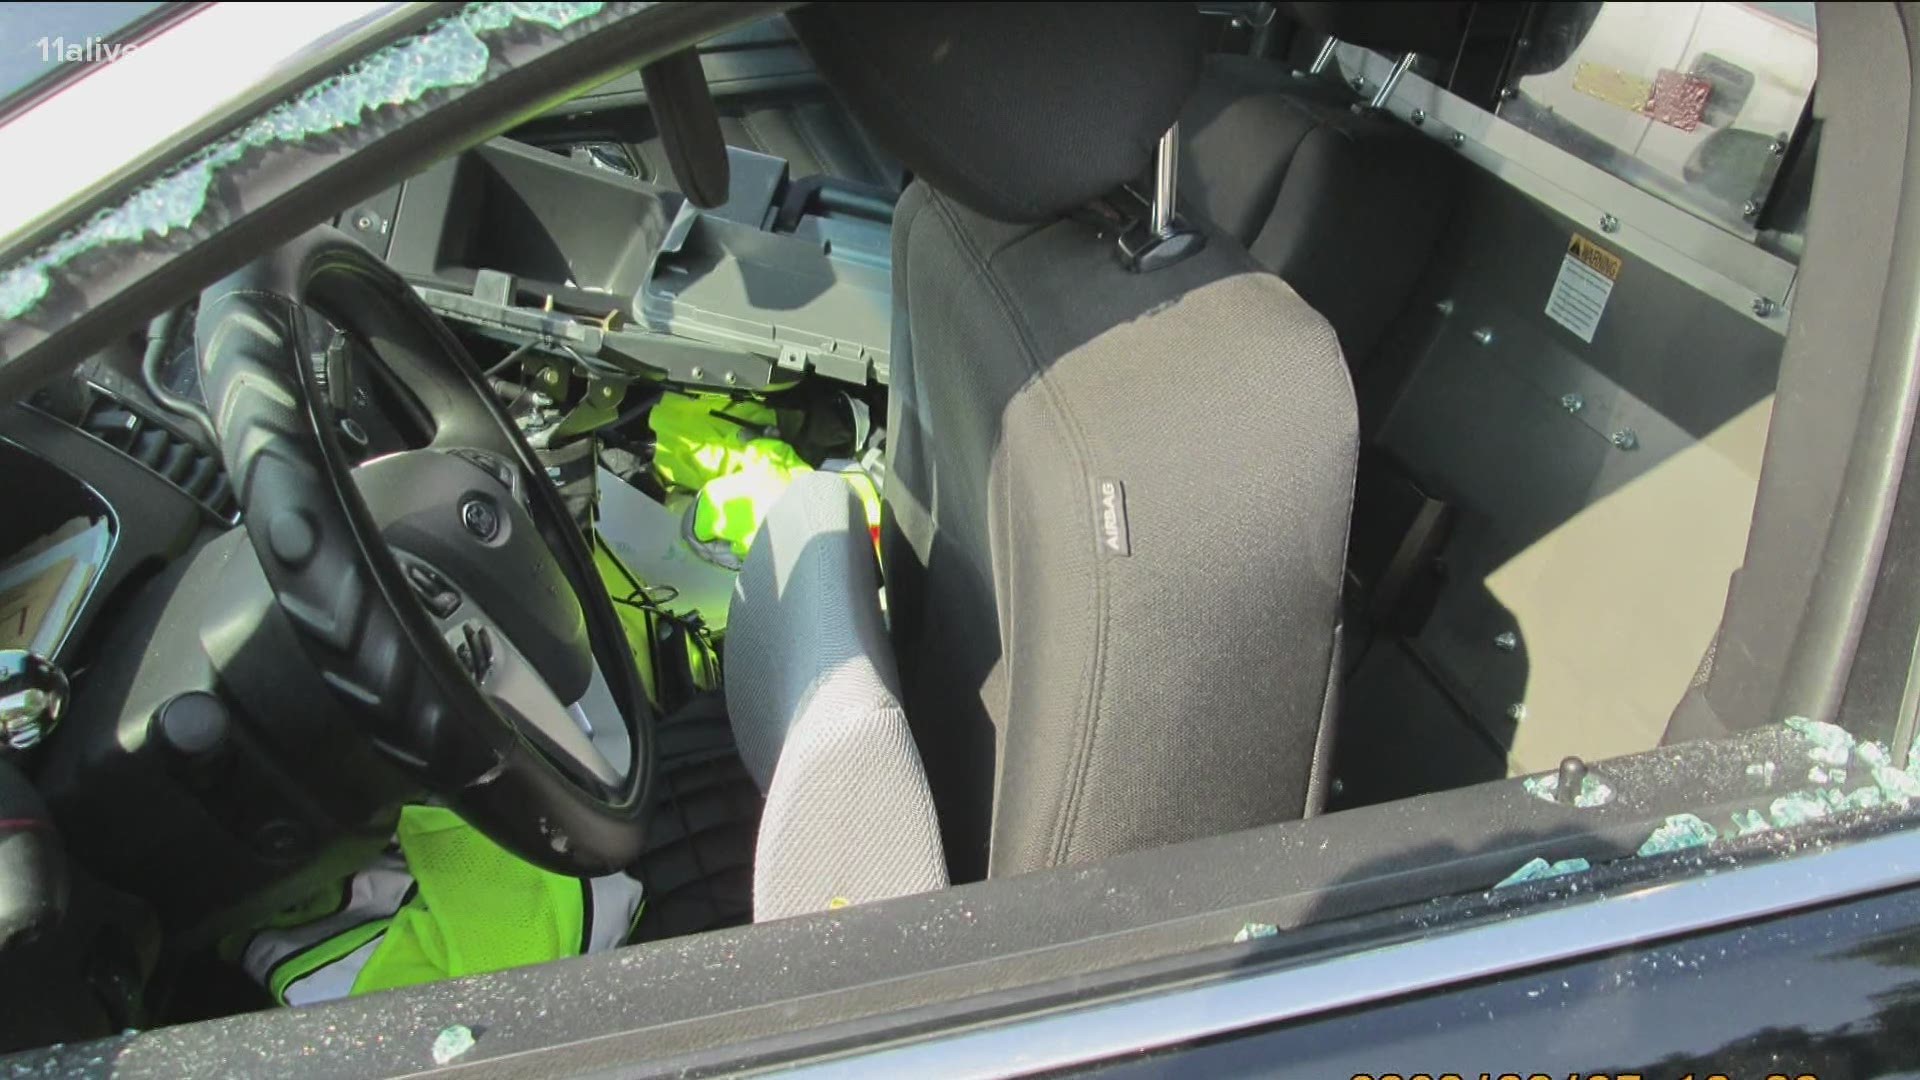 Police say four marked Cobb County Police Department vehicles had been dropped off for service had windows shattered and damage to the trunks and interiors.